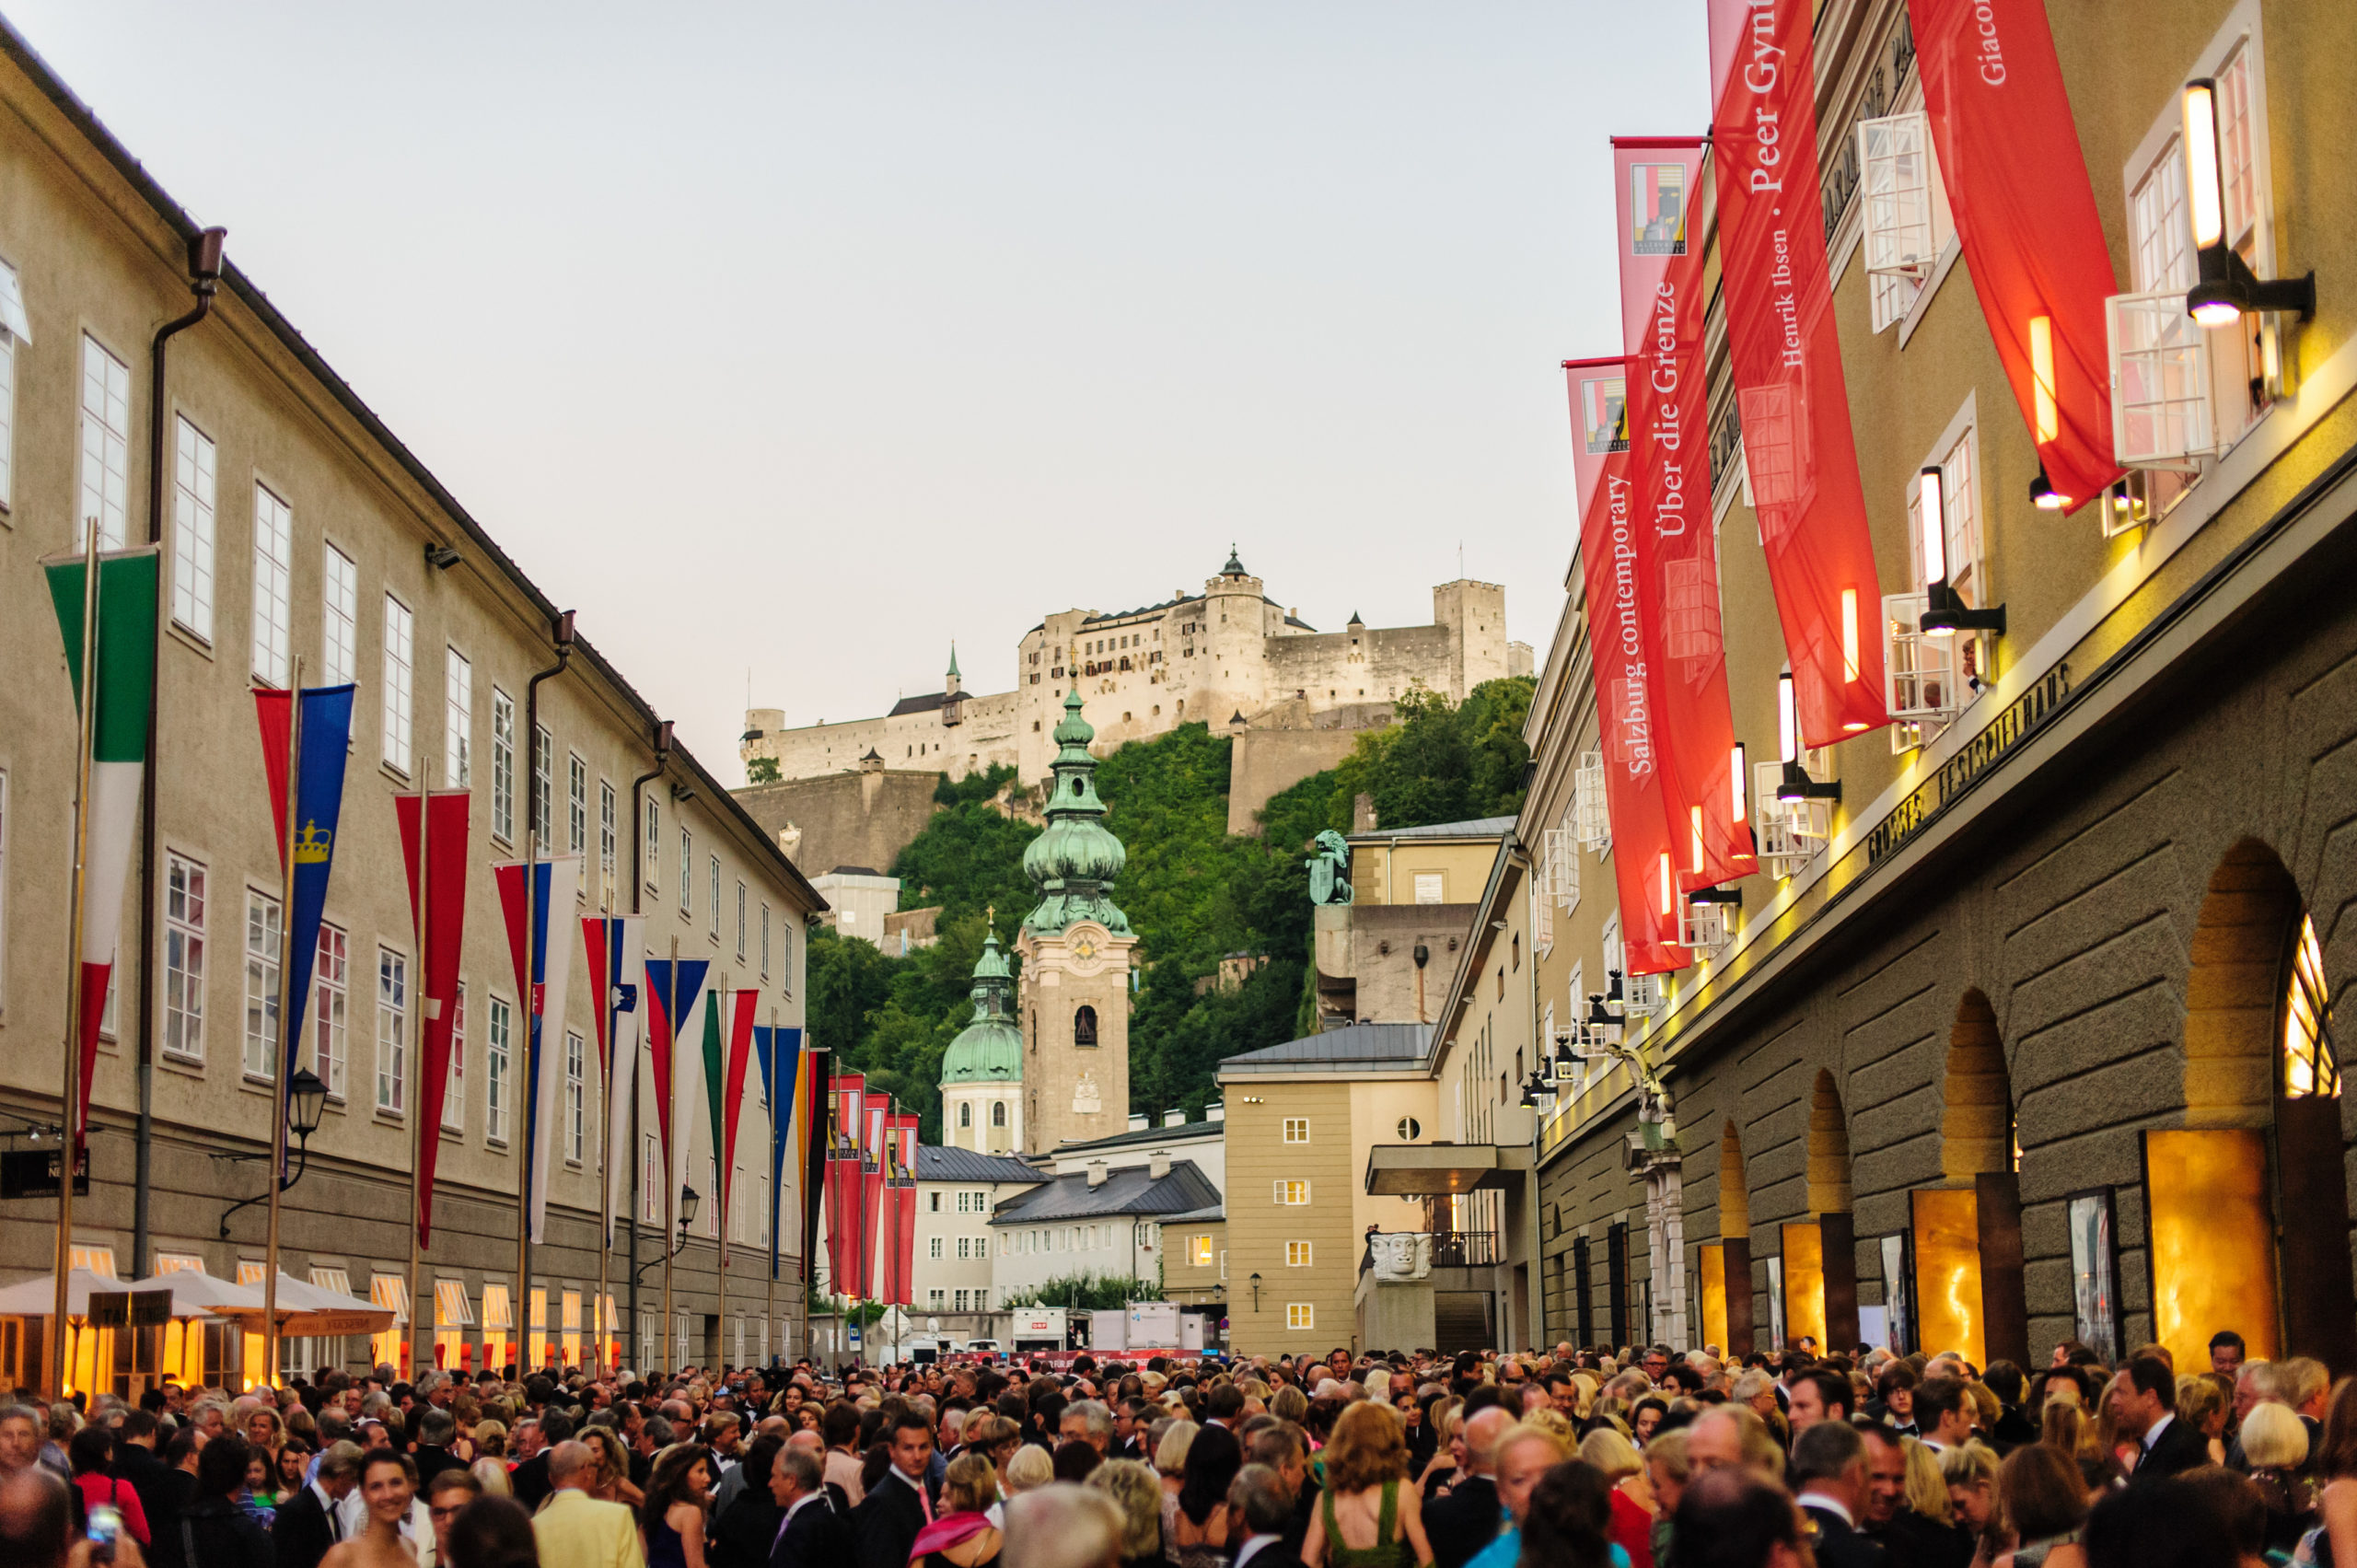 Great World Theatre – Salzburg Festival 2022 Opera and concert experience